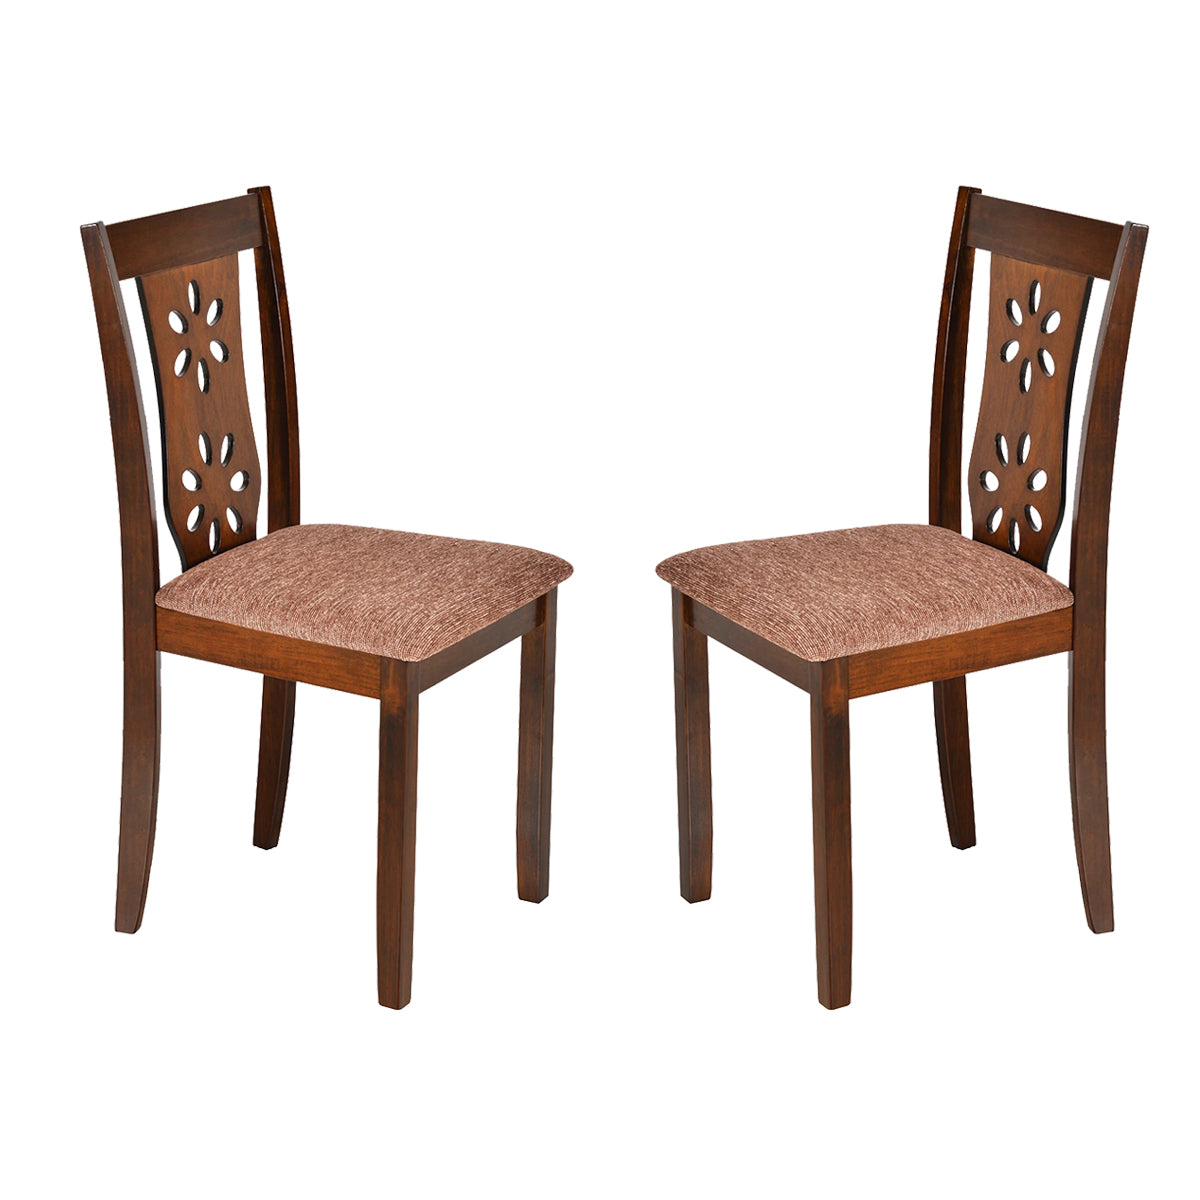 Sutlej Dining Chair with Cushion Set of 2 (Antique Cherry)